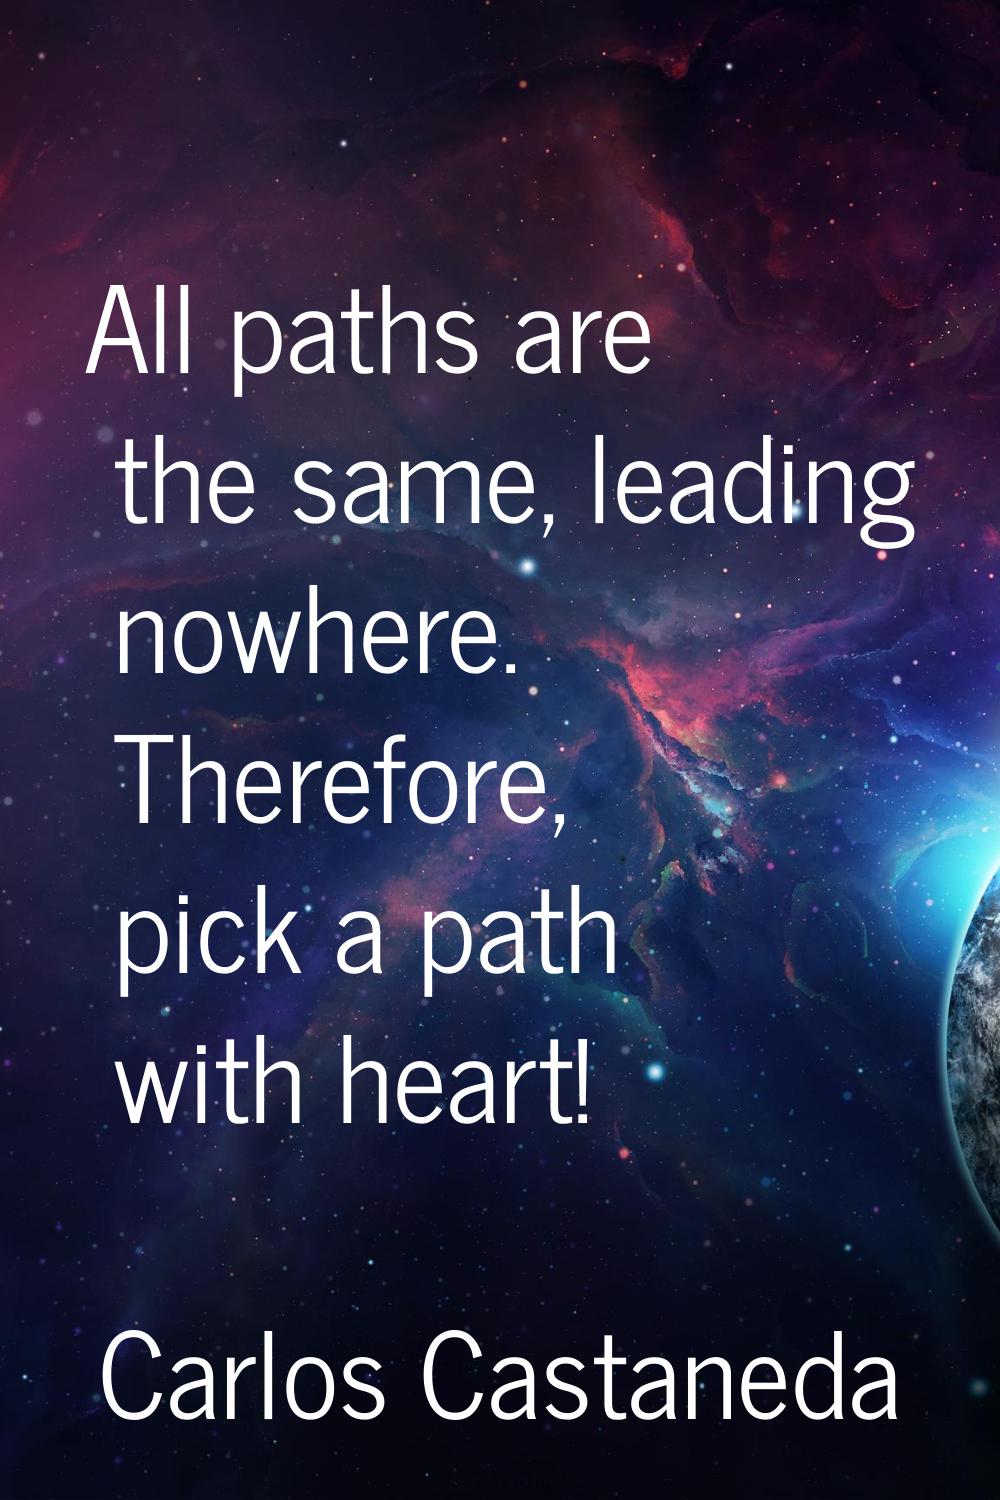 All paths are the same, leading nowhere. Therefore, pick a path with heart!